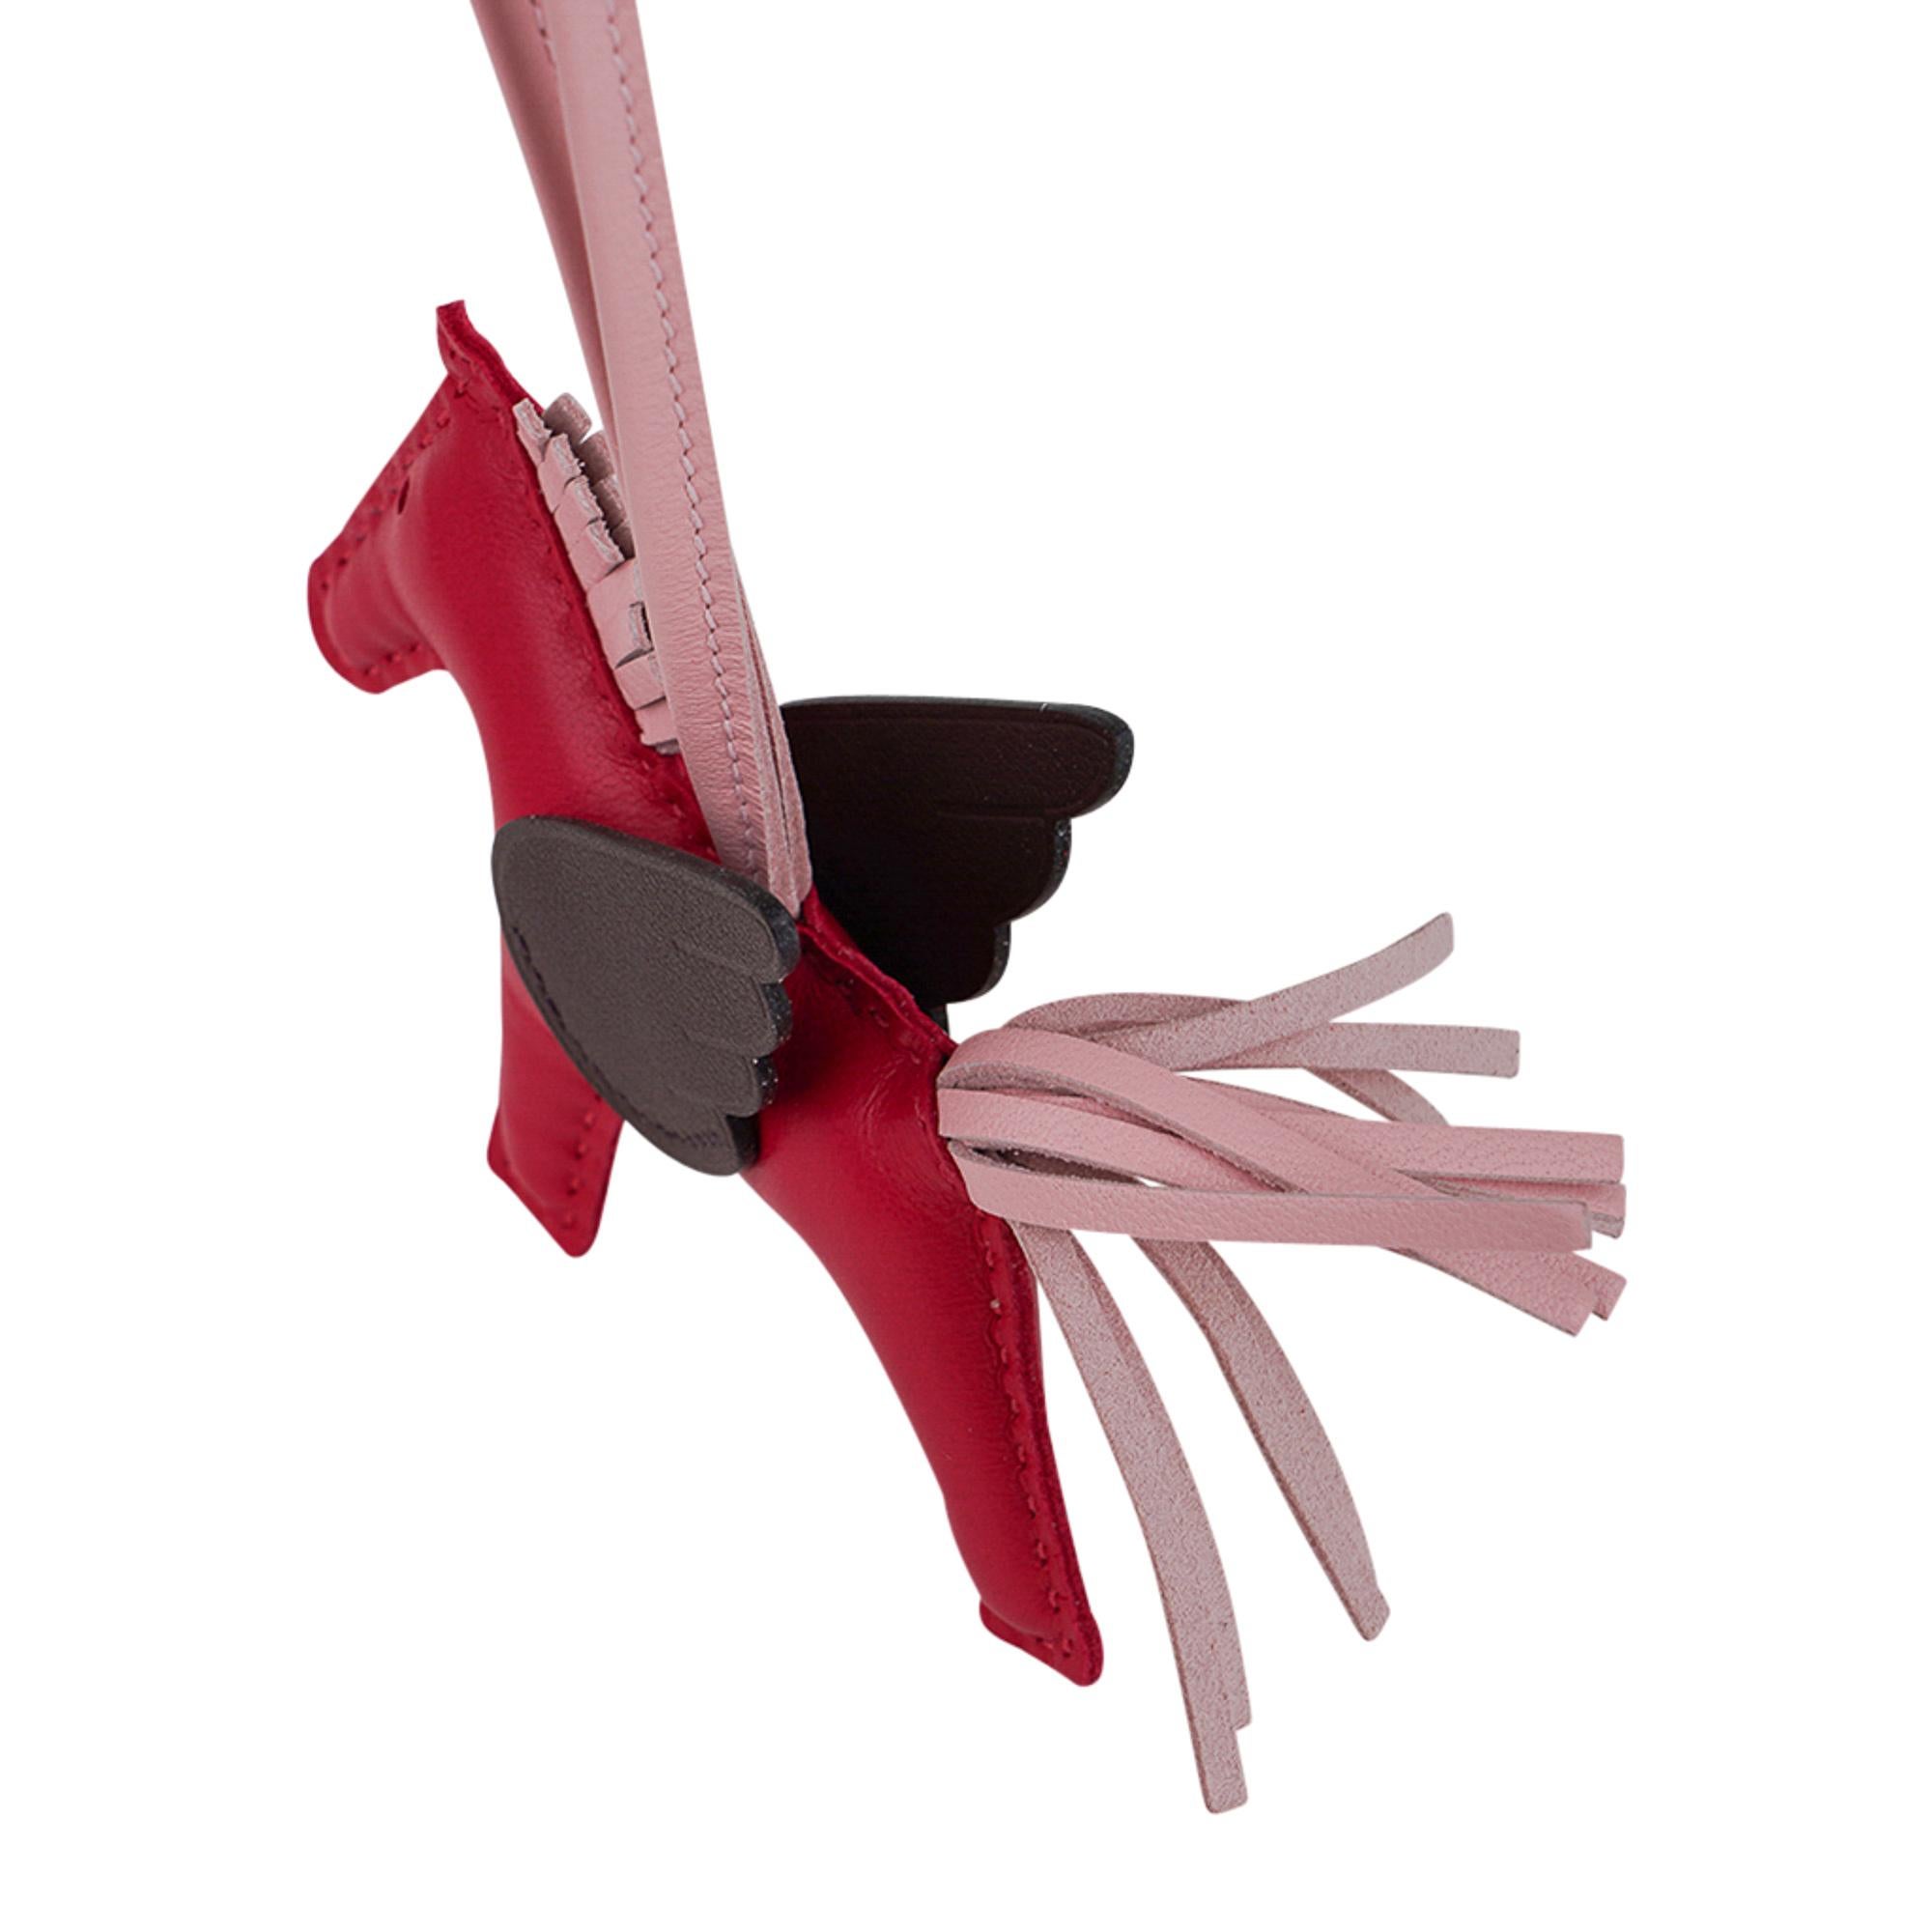 Mightychic offers an Hermes Grigri Pegase Rodeo PM featured in Framboise, Rouge Sellier and Rose Sakura.
Charming and playful she easily adorns a myriad bag colours in your fabulous collection. 
Leather is lambskin Milo.
Signature HERMES PARIS MADE